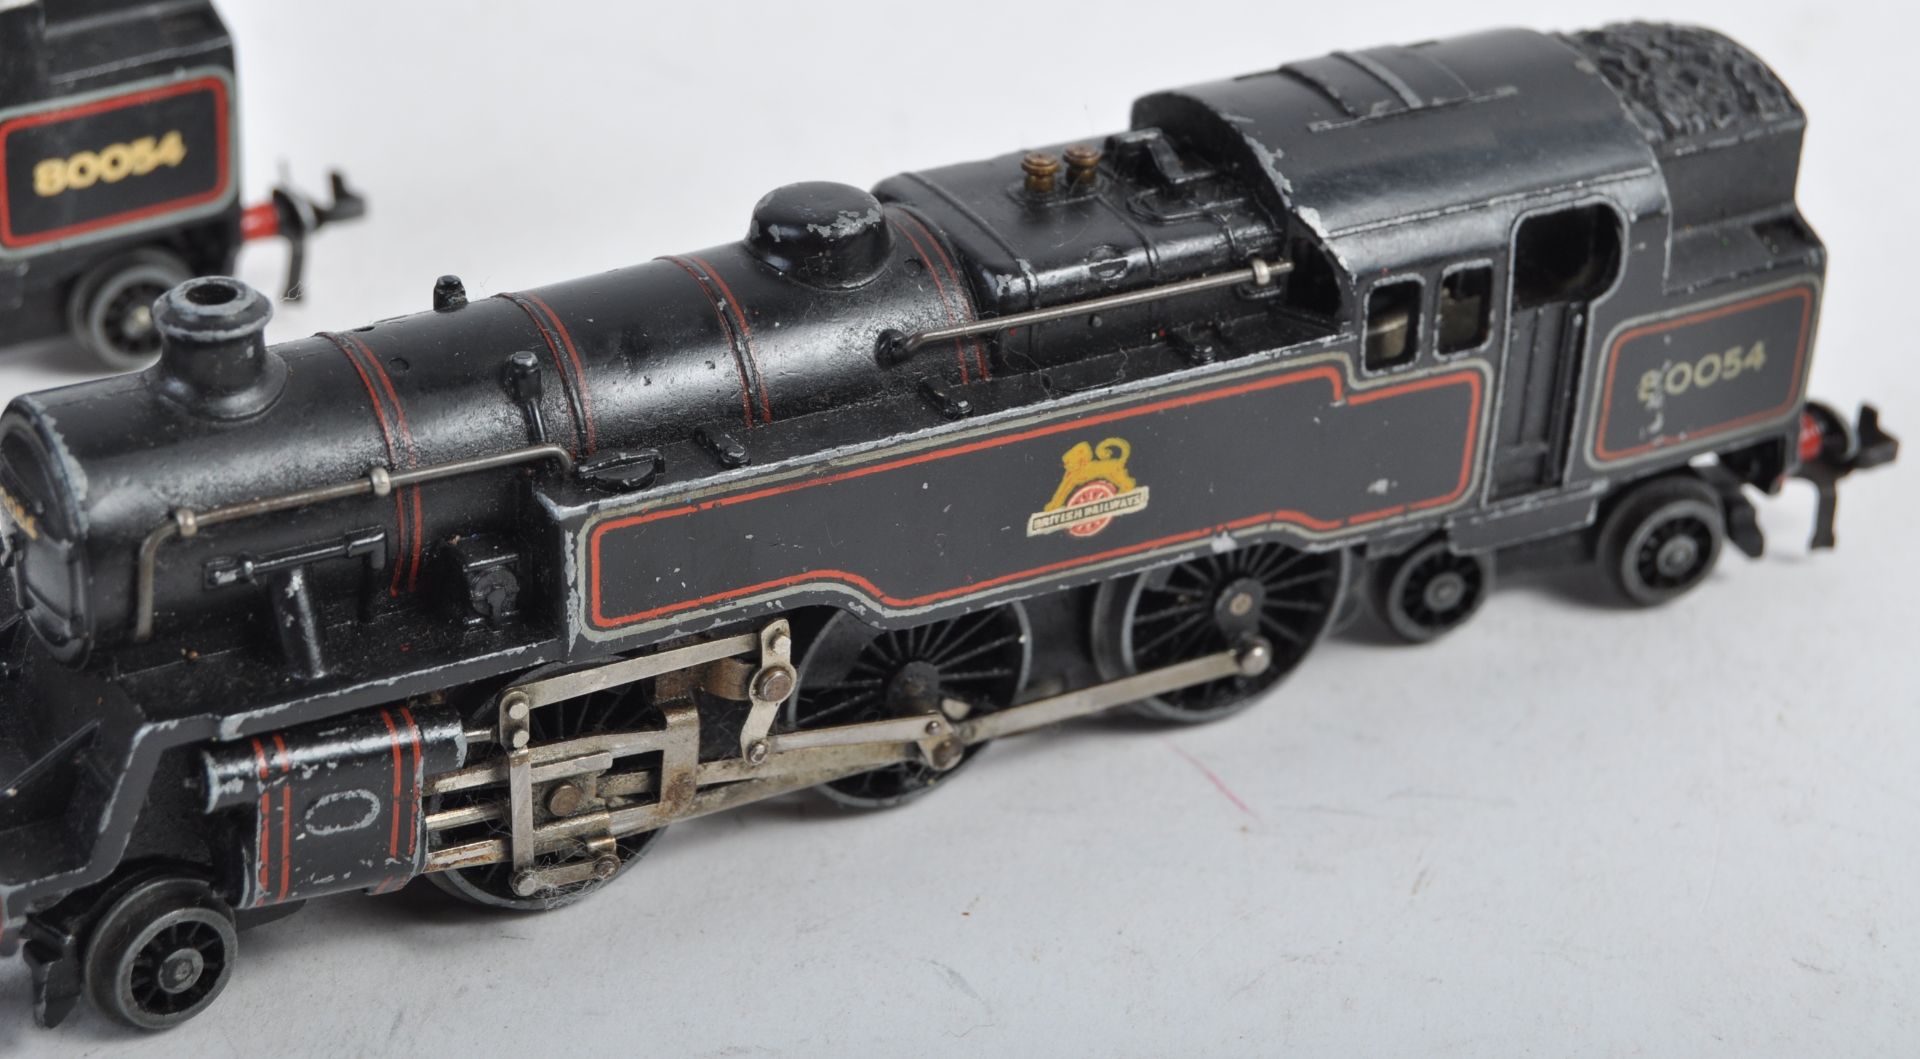 TWO HORNBY DUBLO MADE 00 GAUGE 80054 LOCOS - Image 3 of 4